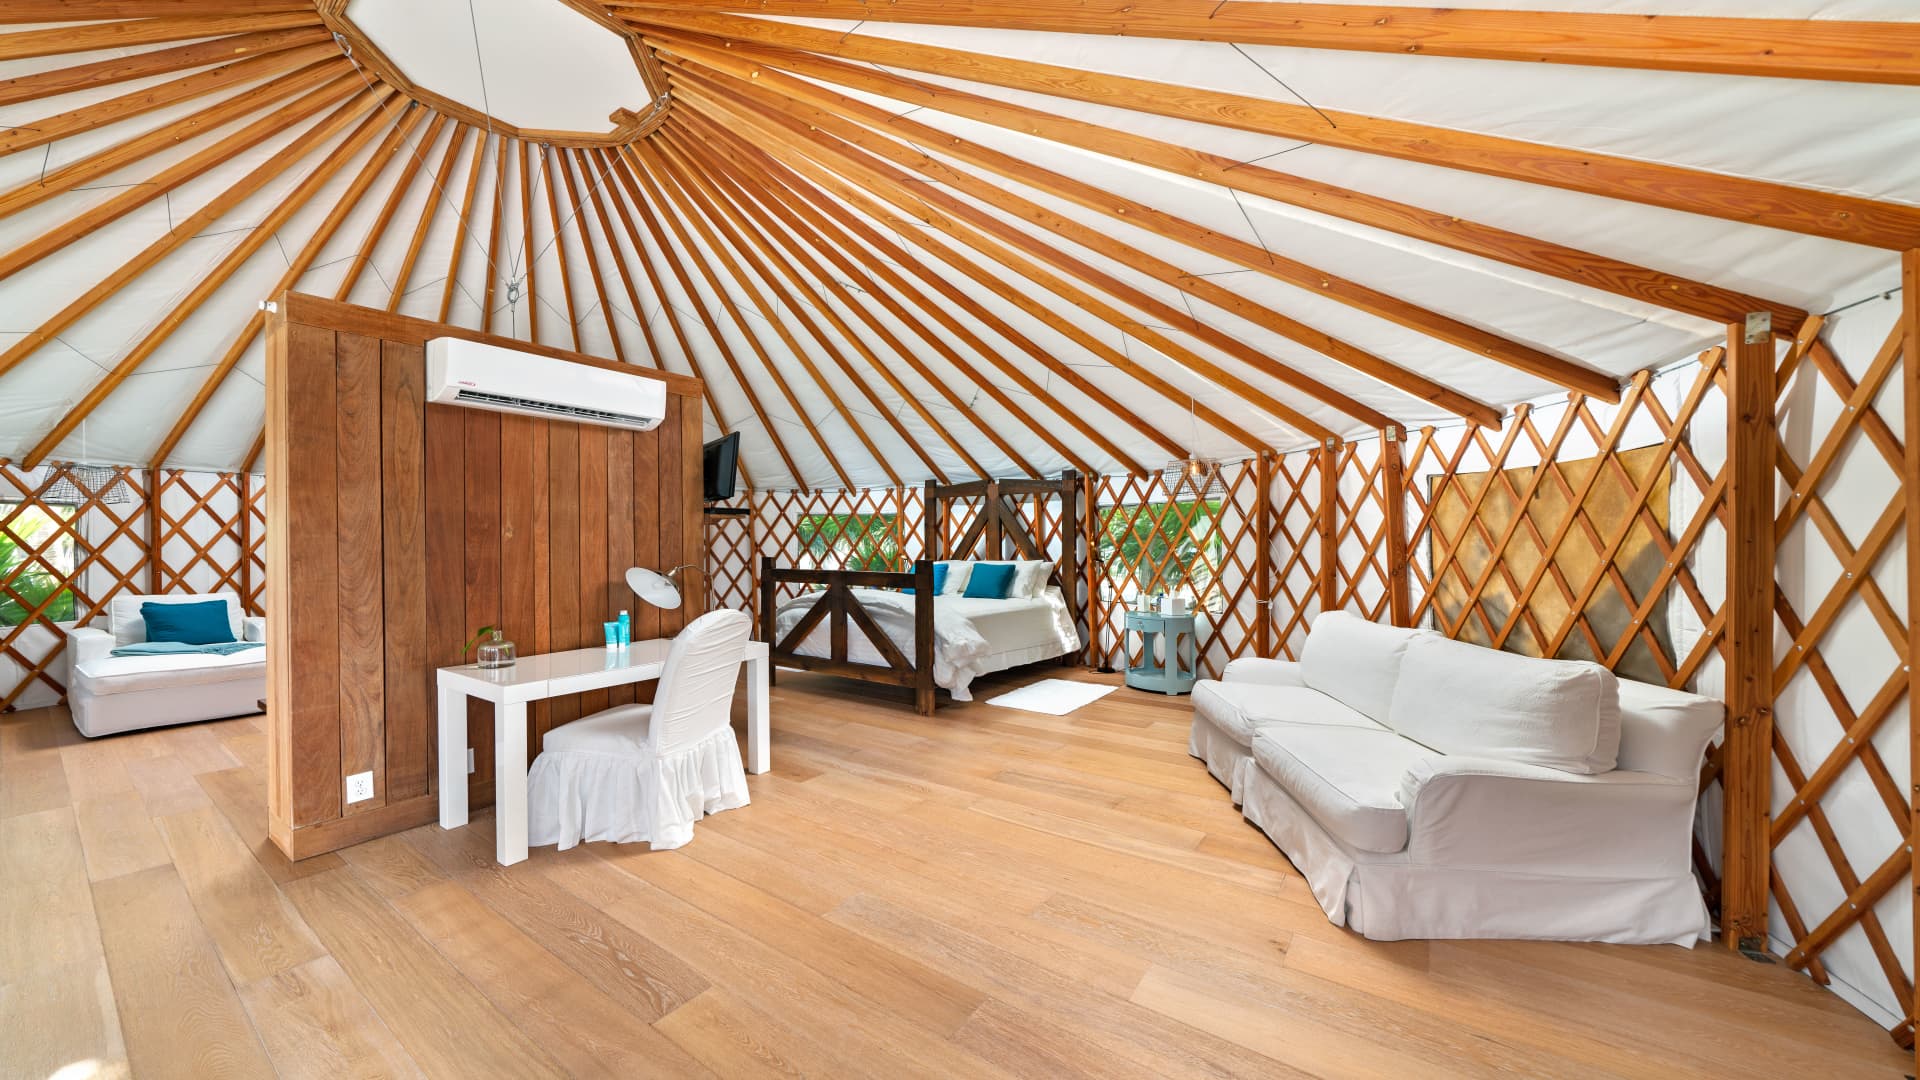 A look inside the beachfront yurt that is furnished as a bedroom.